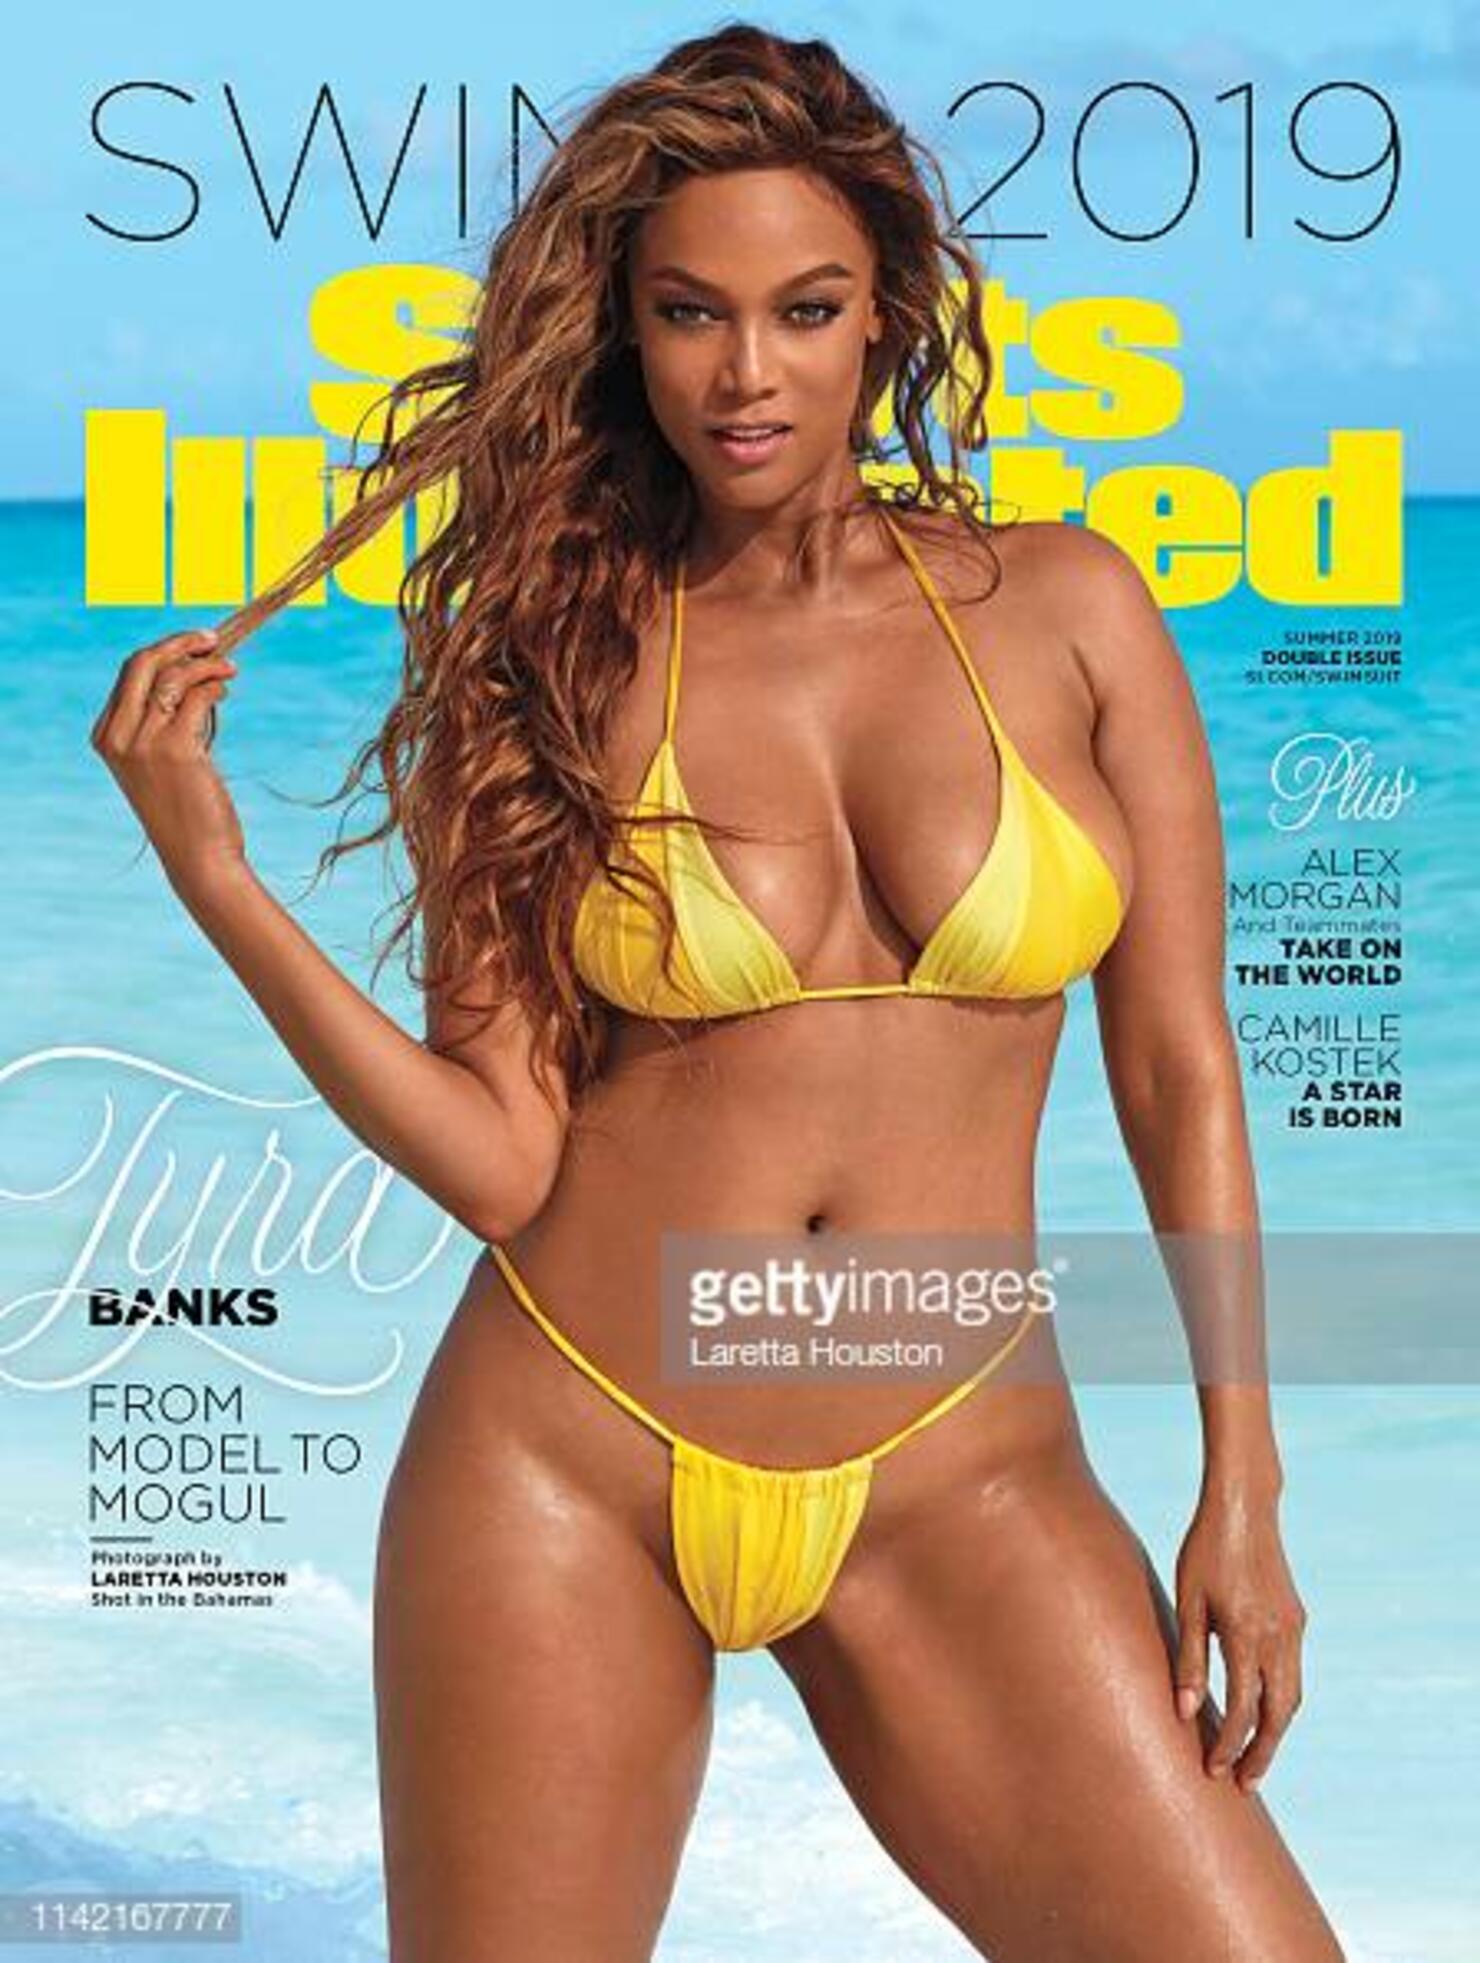 Hot 56-Year-Old Mom Is Now A 'Sports Illustrated' Swimsuit Model